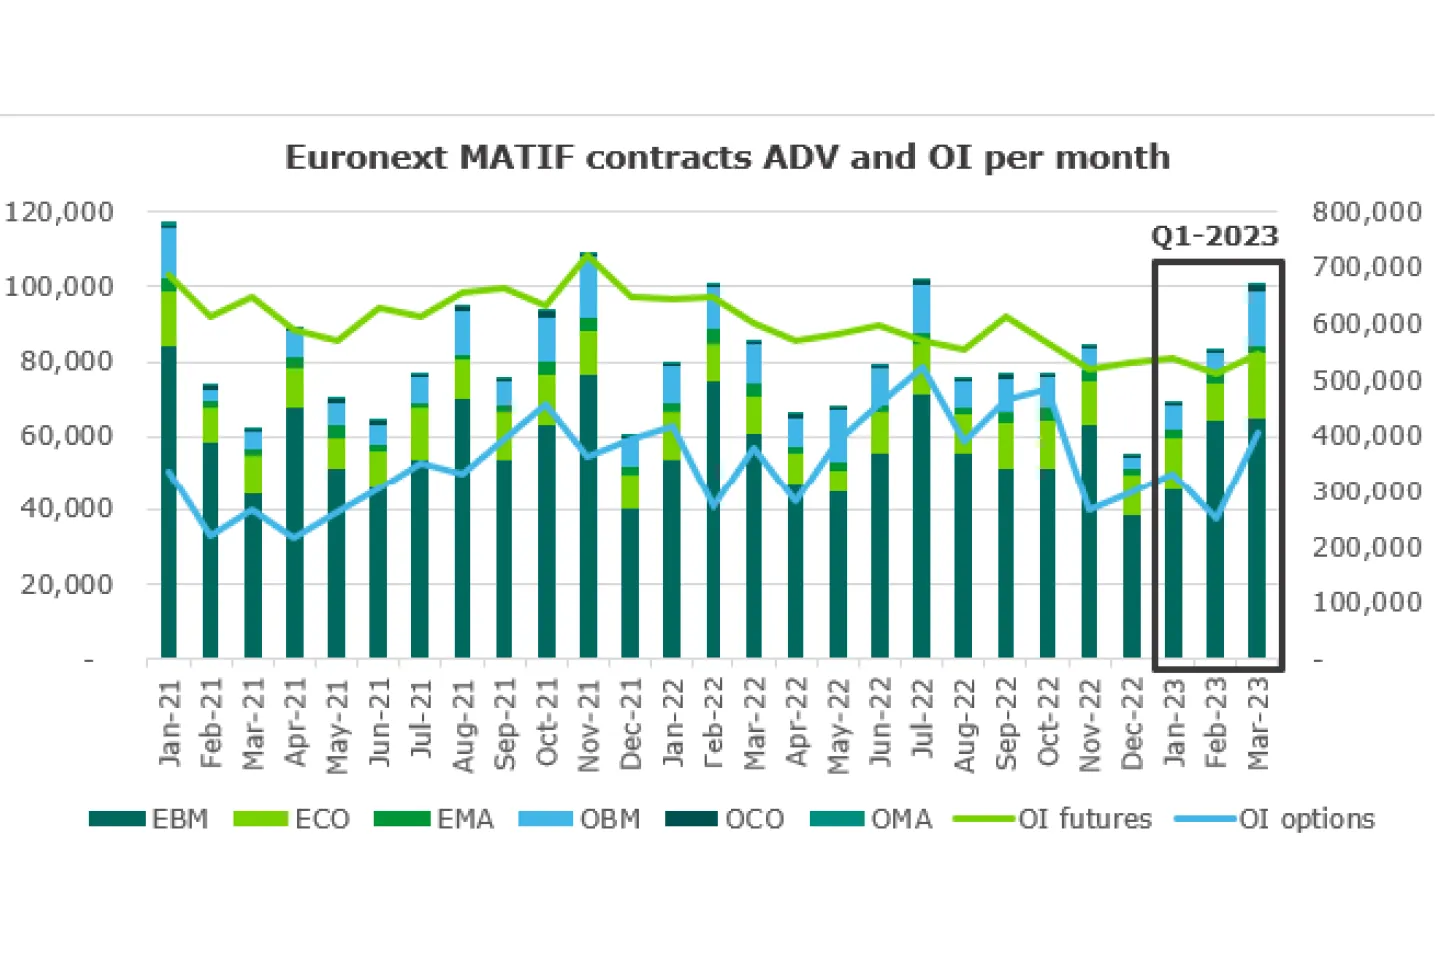 Euronext MATIF contracts ADV and OI per month - Q1 2023